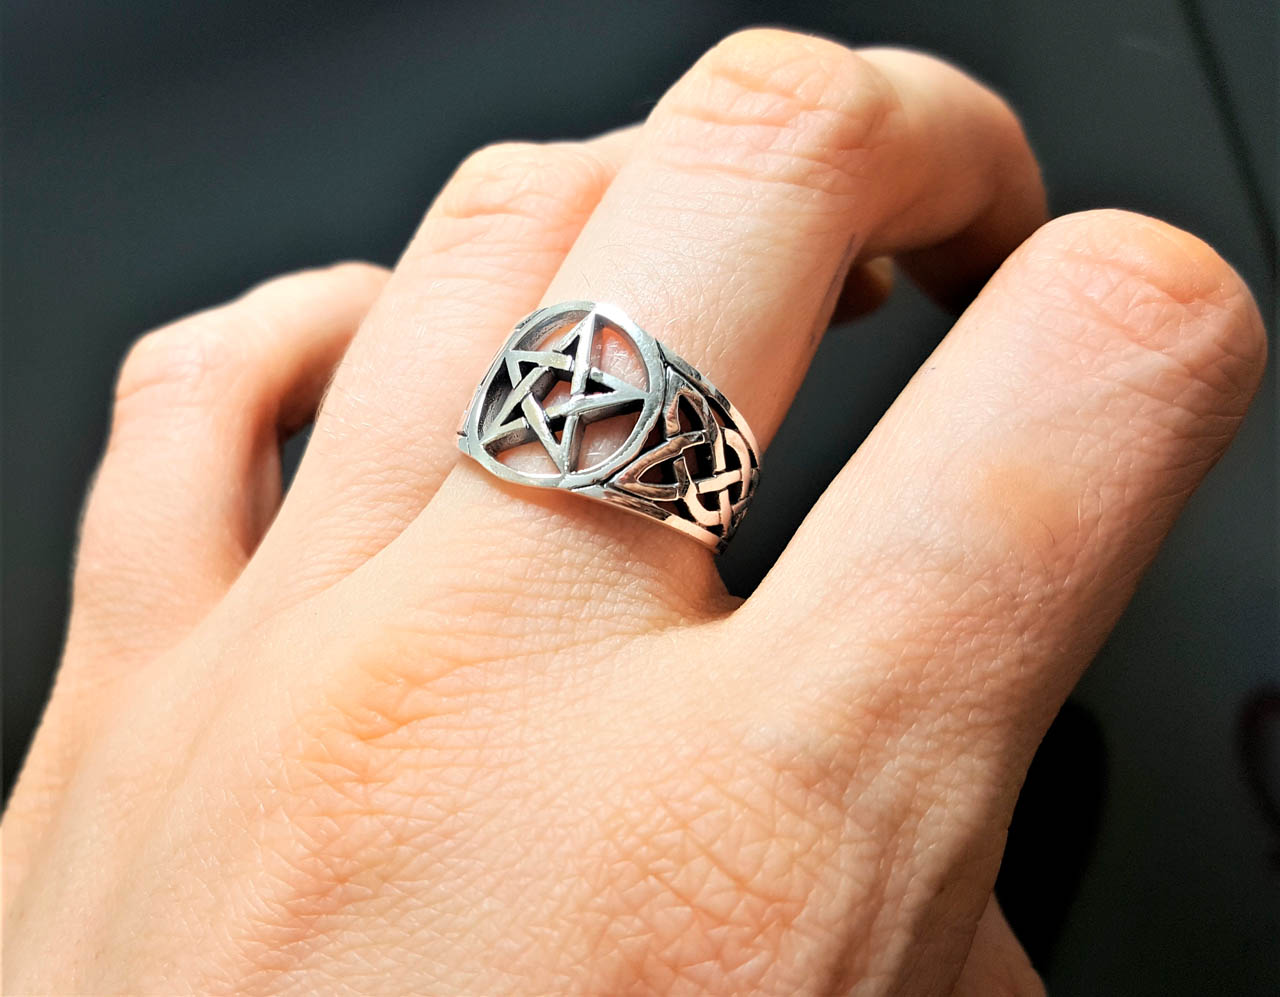 HZMAN Jewelry Silver Stainless Steel Ring with Pentagram and Tribal Designs 